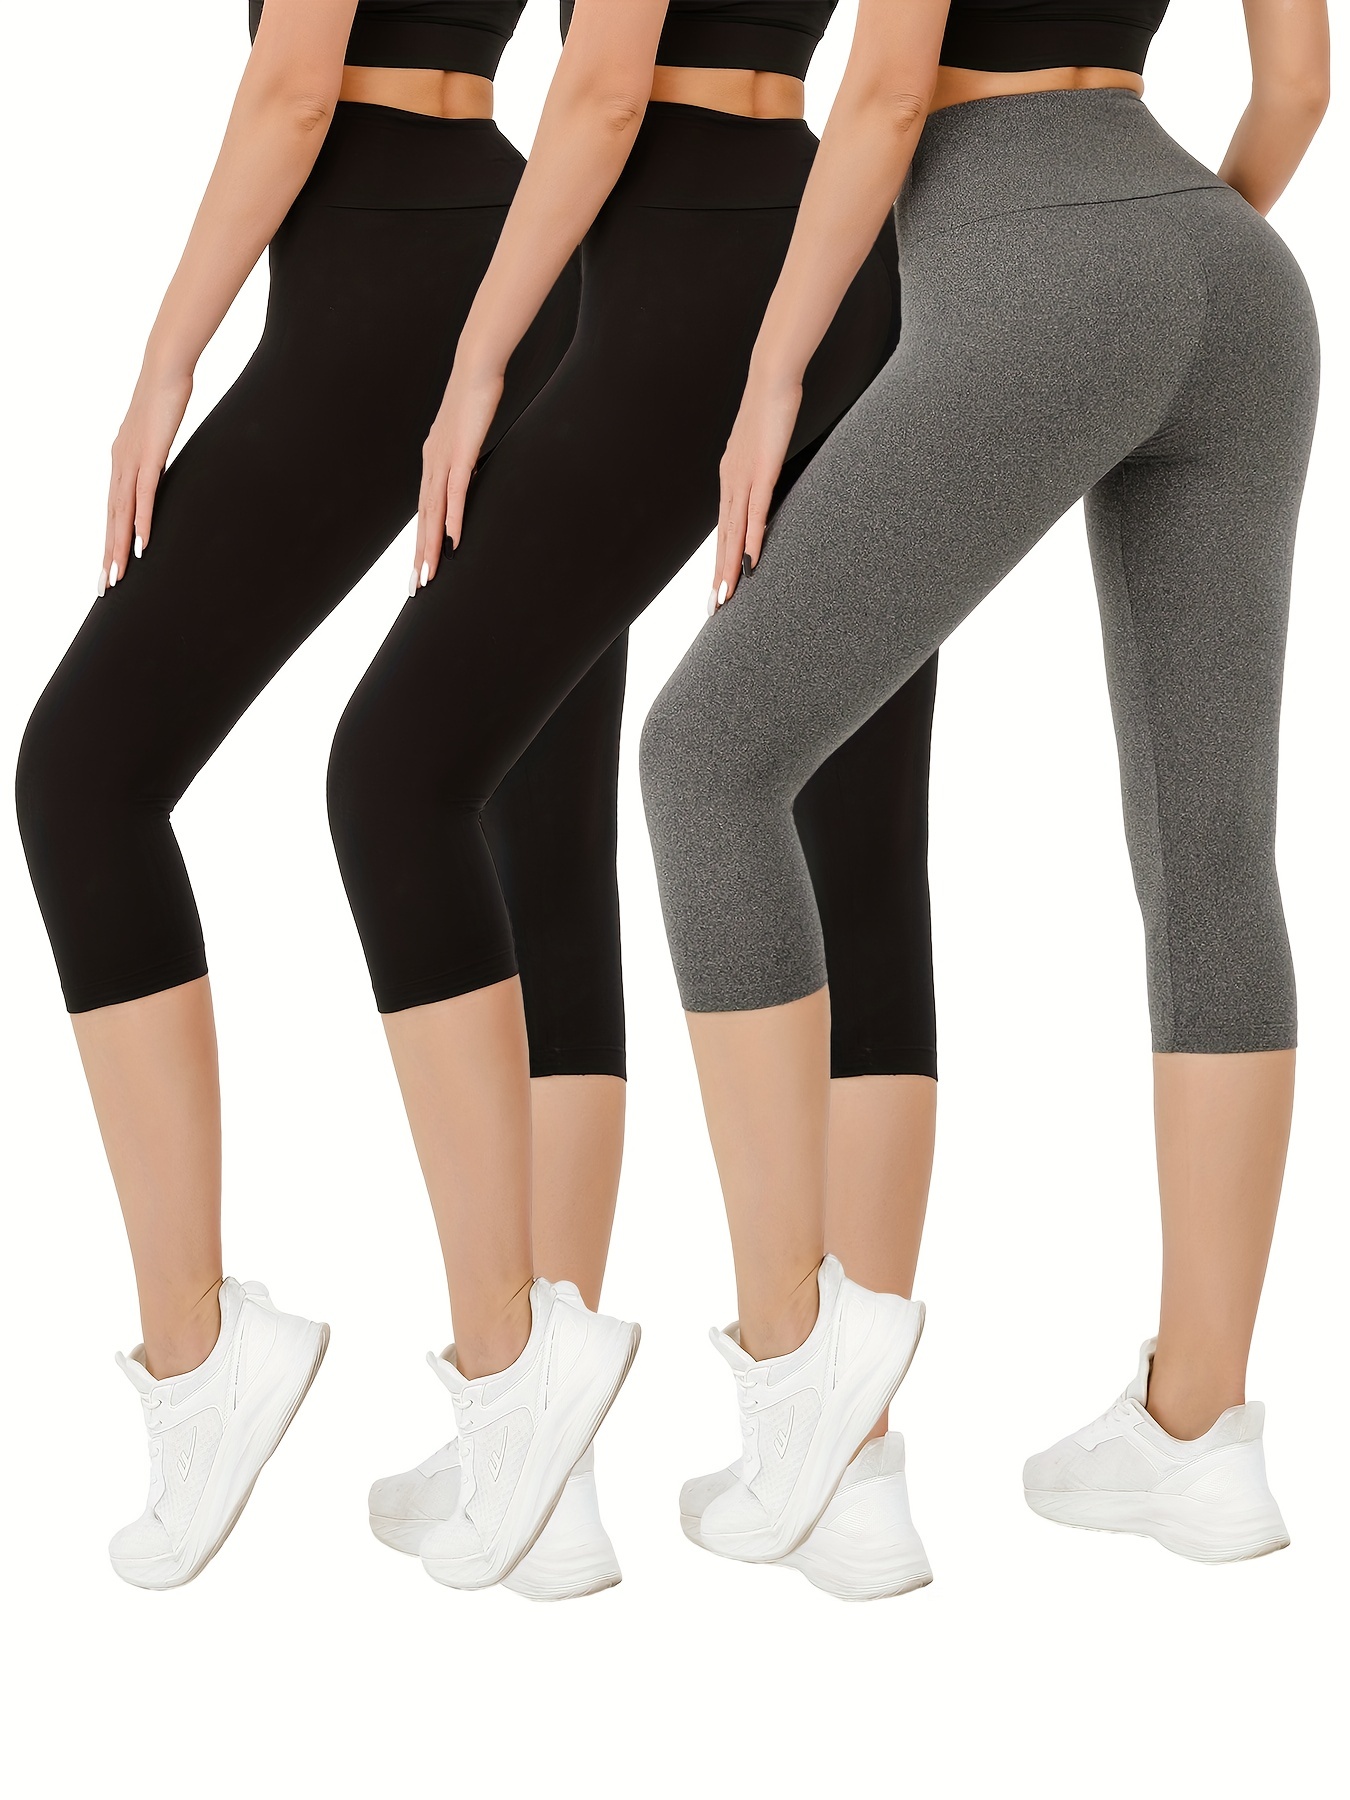 Women's High Waisted Yoga Capris with Pockets,Mesh Tummy Control Non See  Through Workout Sports Running Capri Leggings S-XL